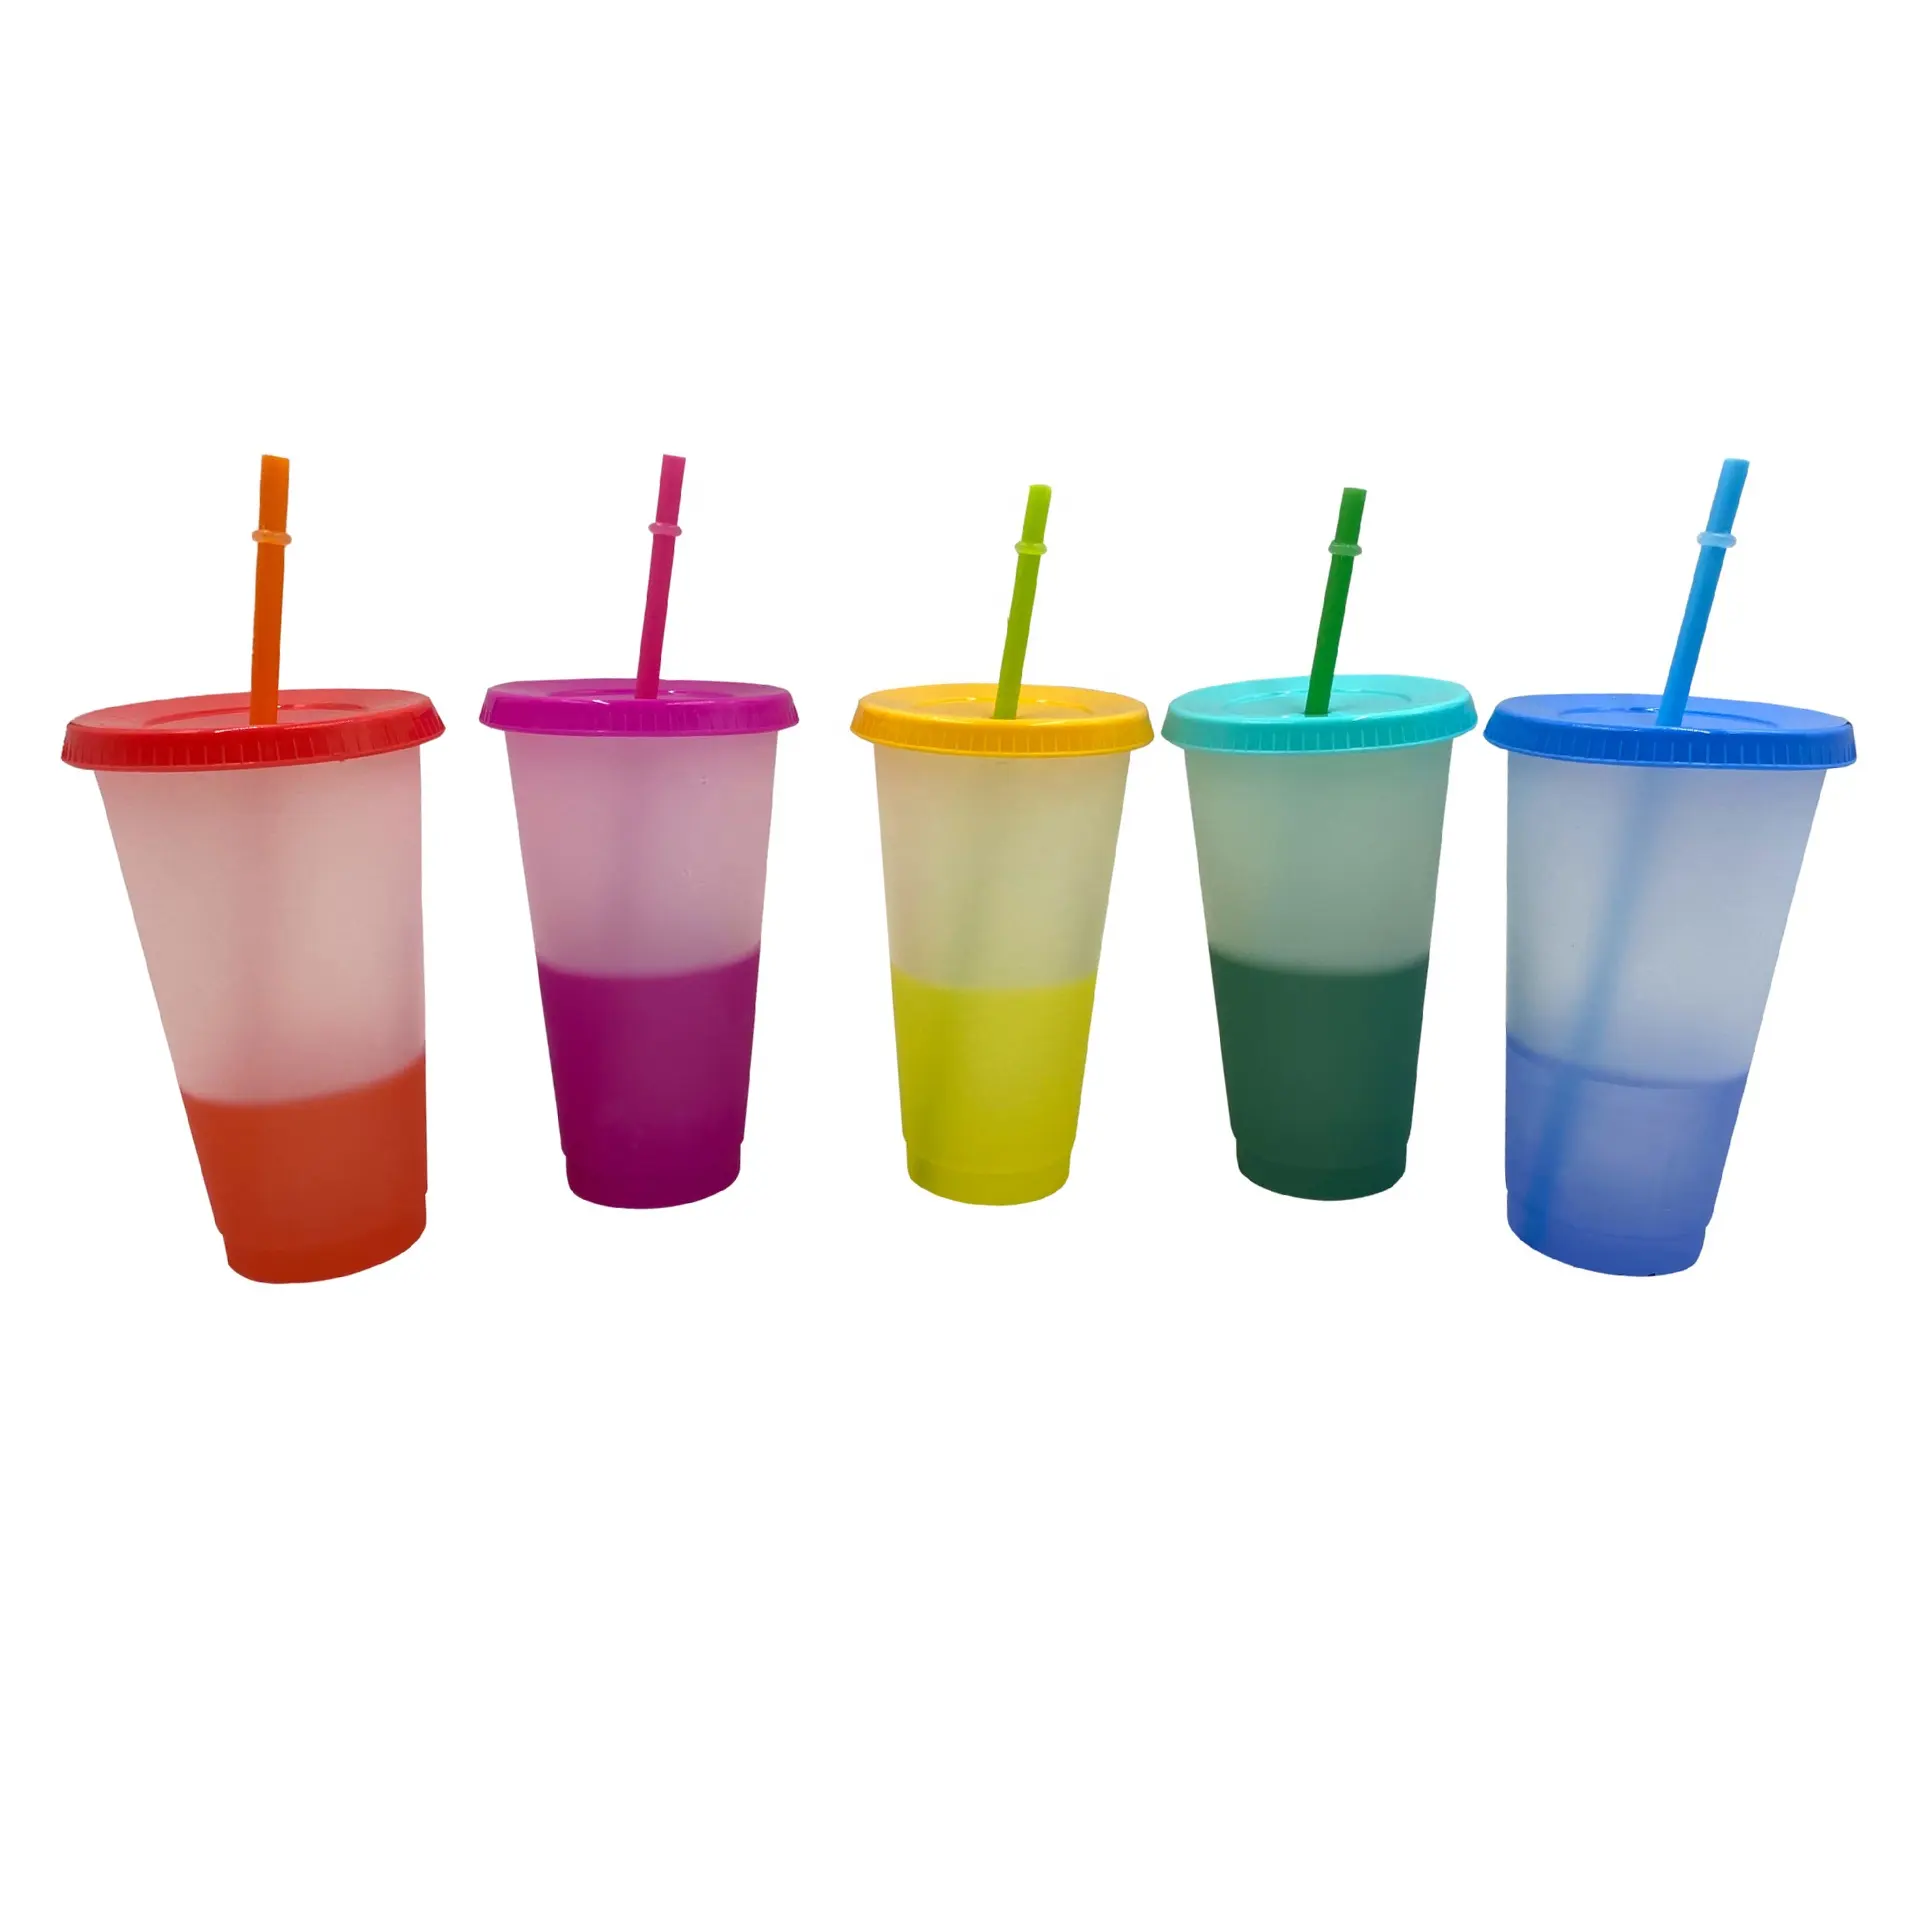 Colour Changing Cups Travel Mugs, 24oz Tumblers with Lids Straws for Kids Adults Reusable Party Drinking Cups Iced Coffee Cup